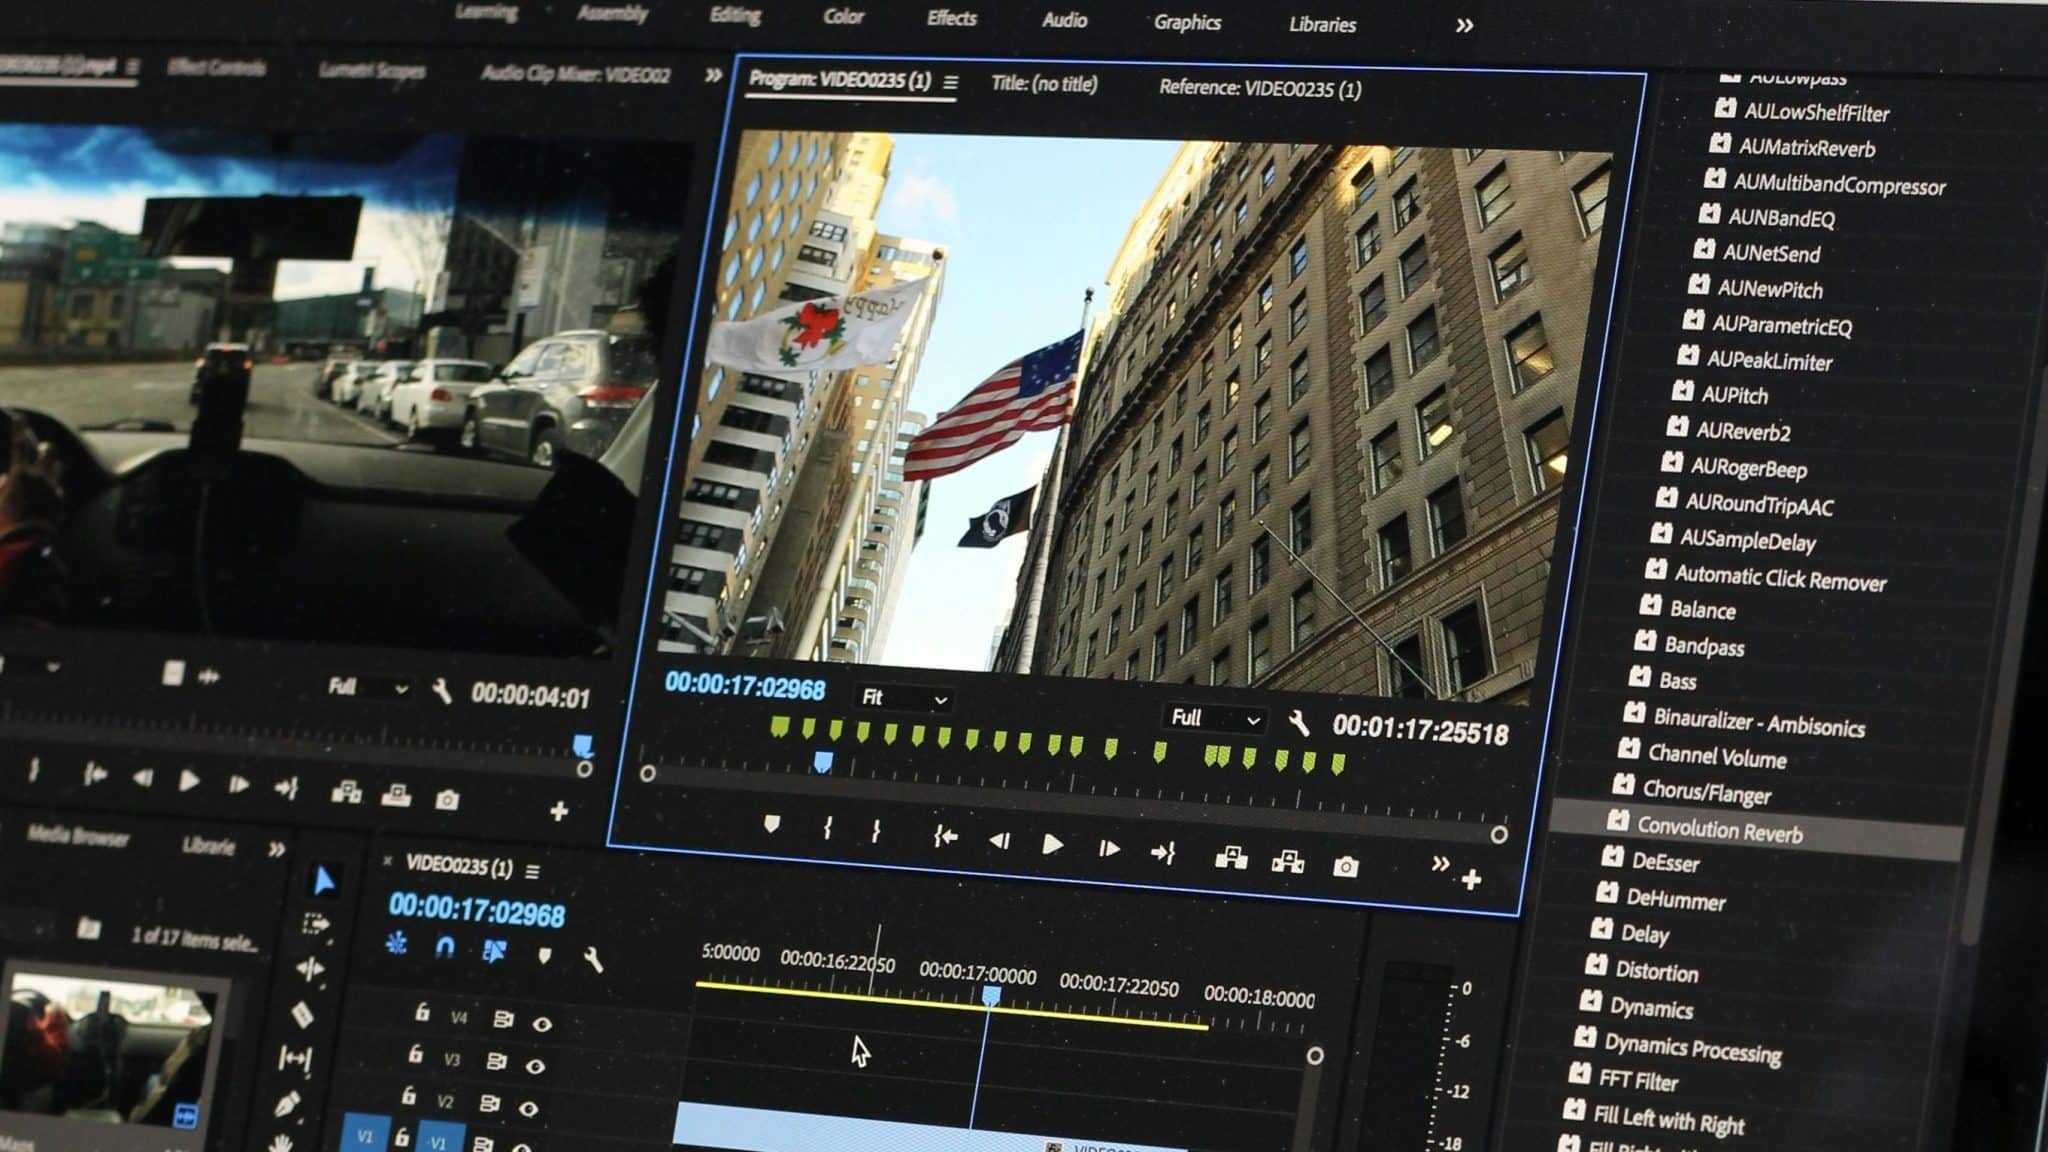 editing software to showcase transition tips